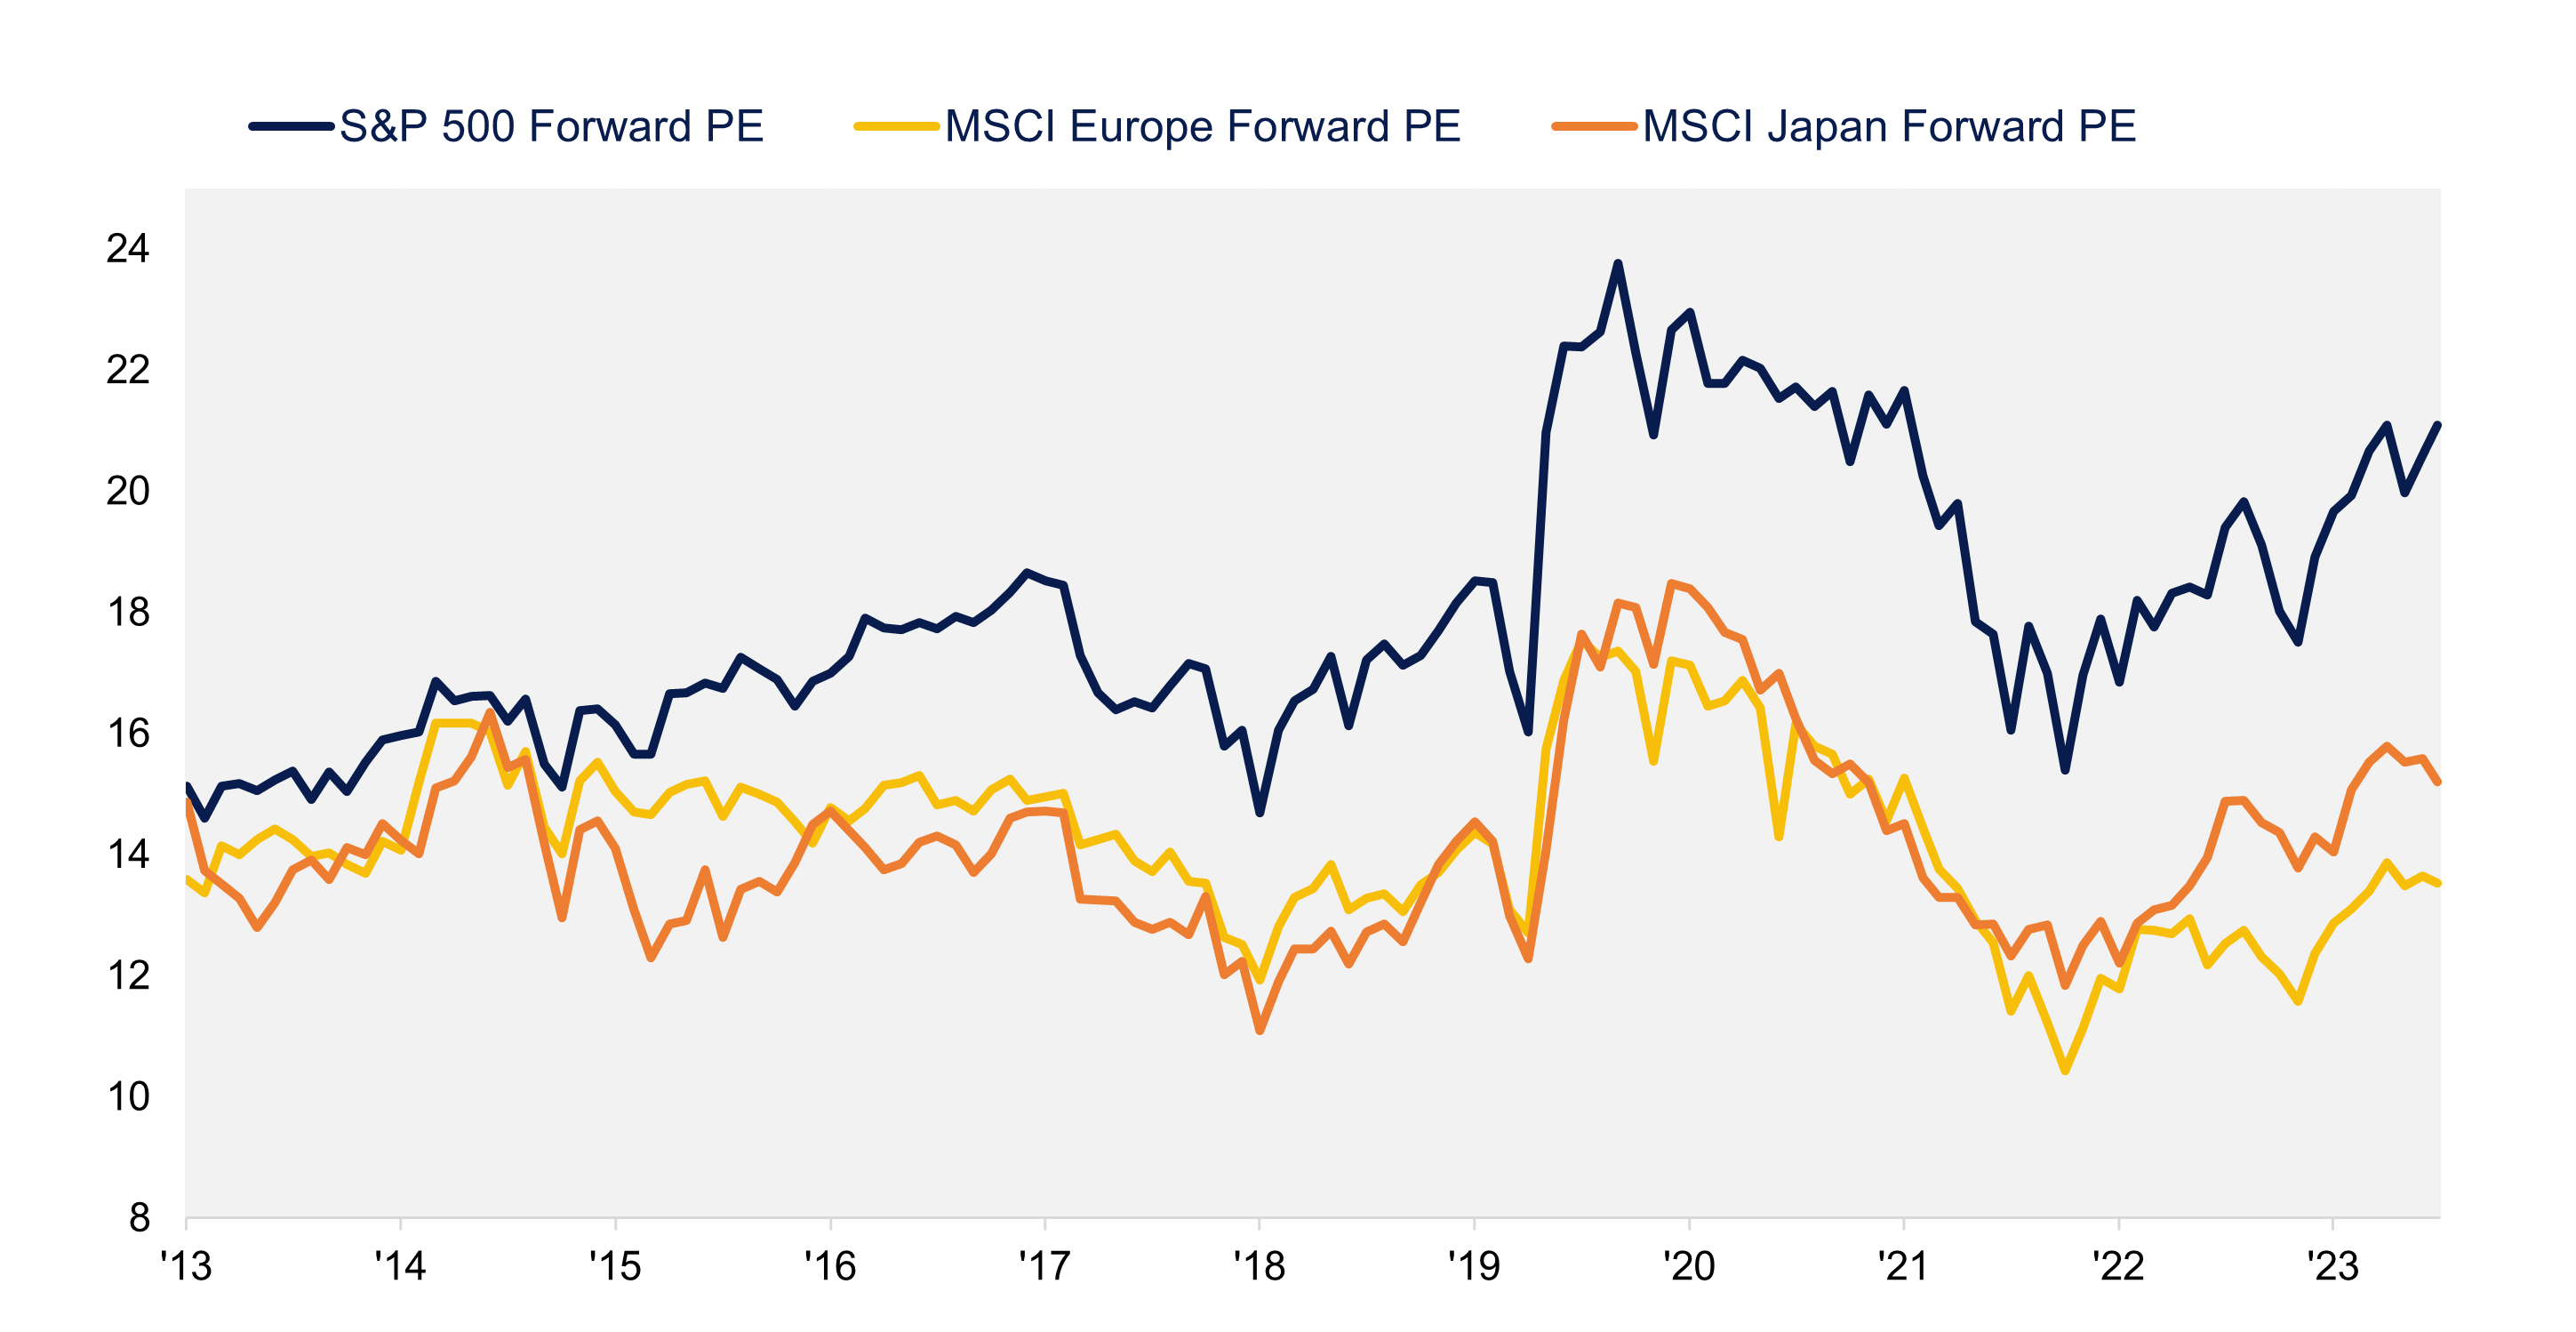 This chart depicts the forward price-to-earnings ratio for the S&P 500, MSCI Europe, and MSCI Japan from 2013 to 2023 as described in the previous paragraph.